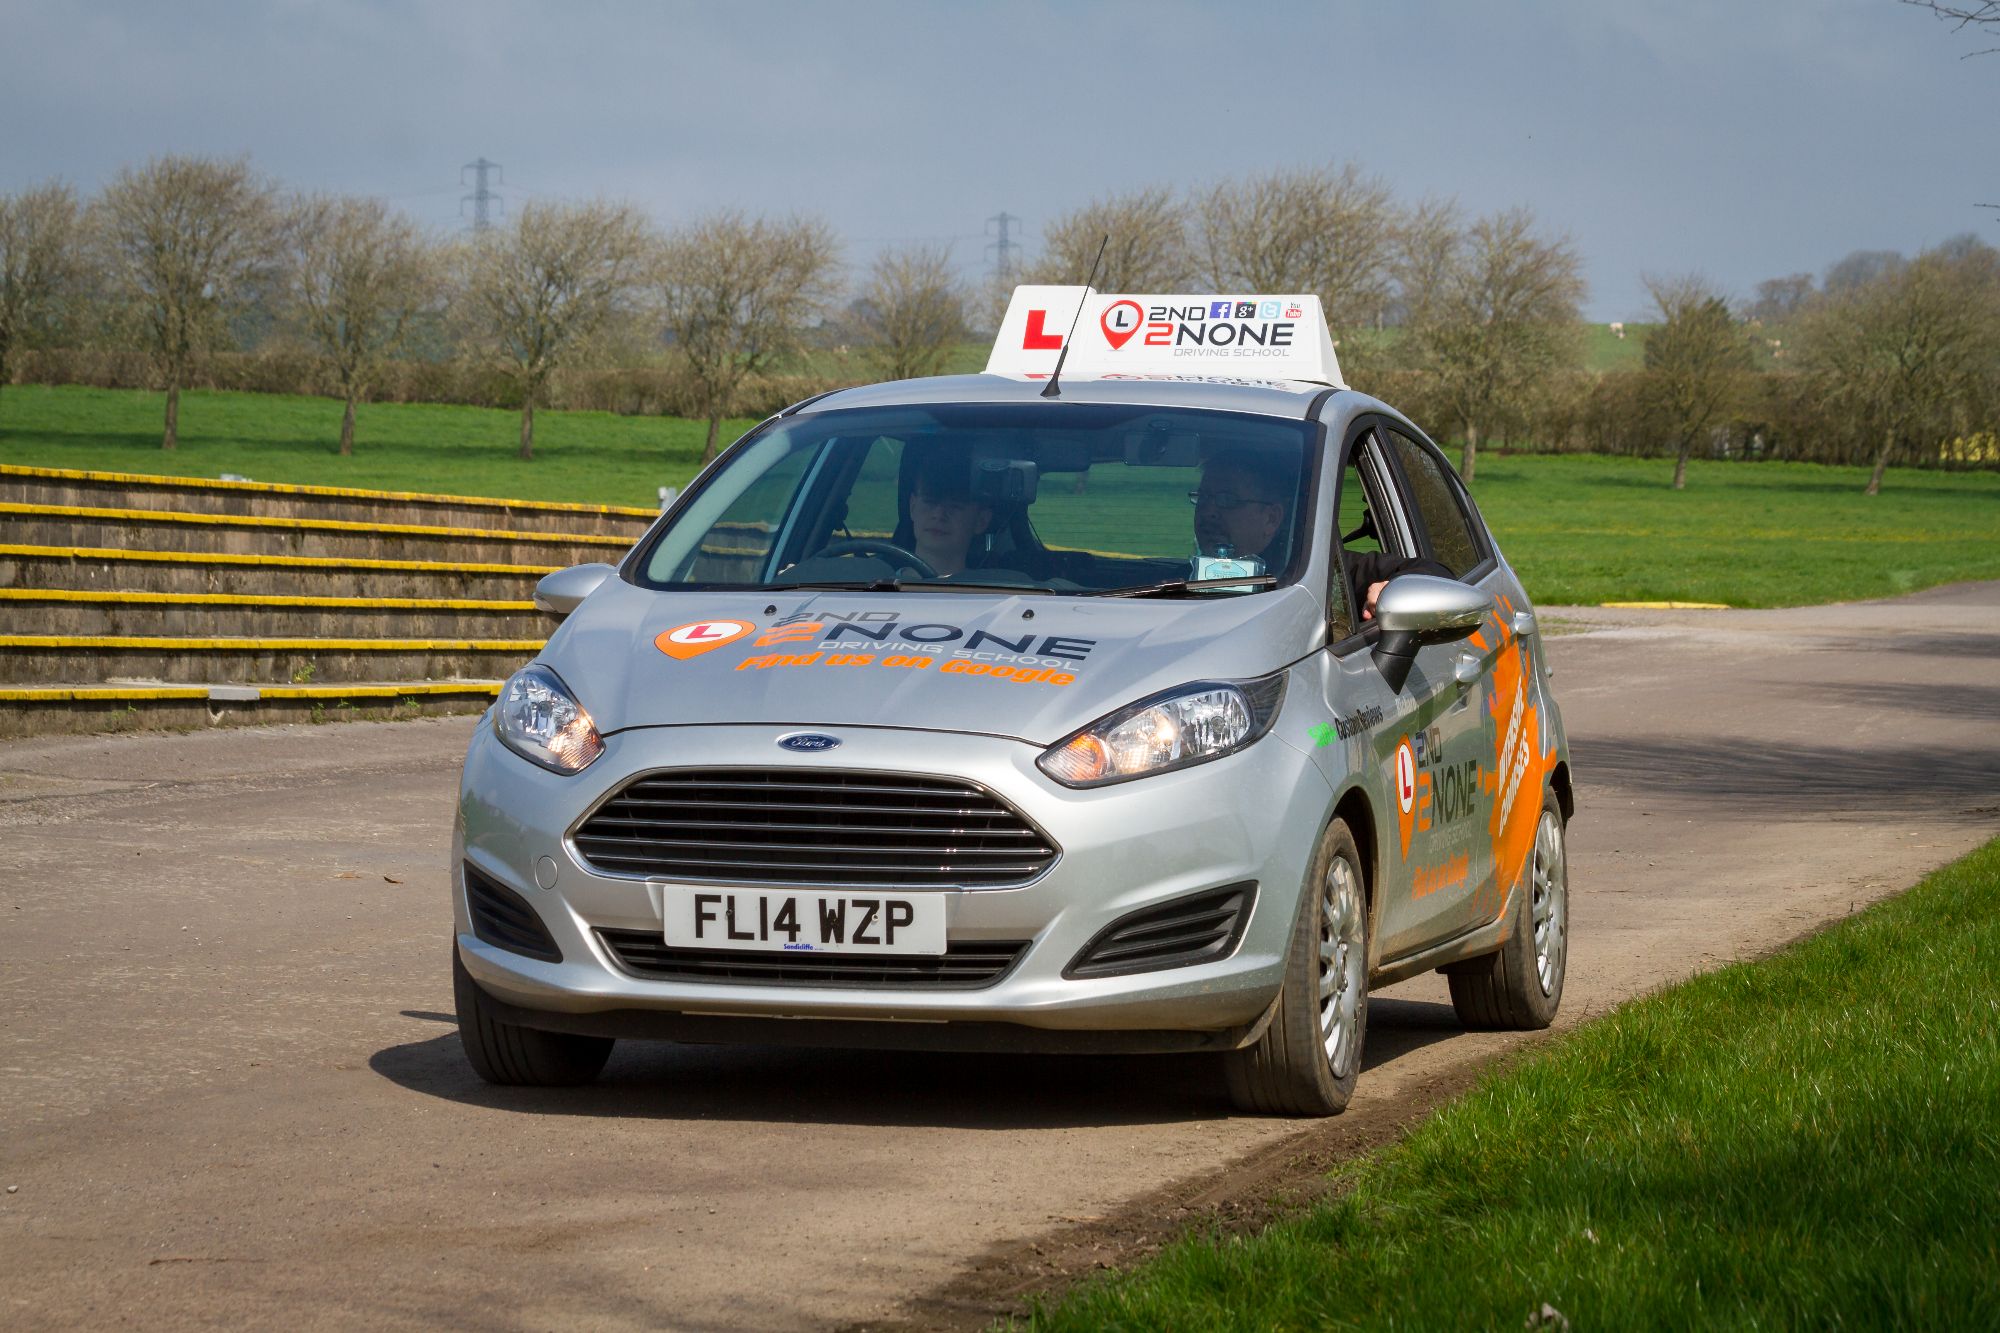 Under 17's driving lessons Yeovil